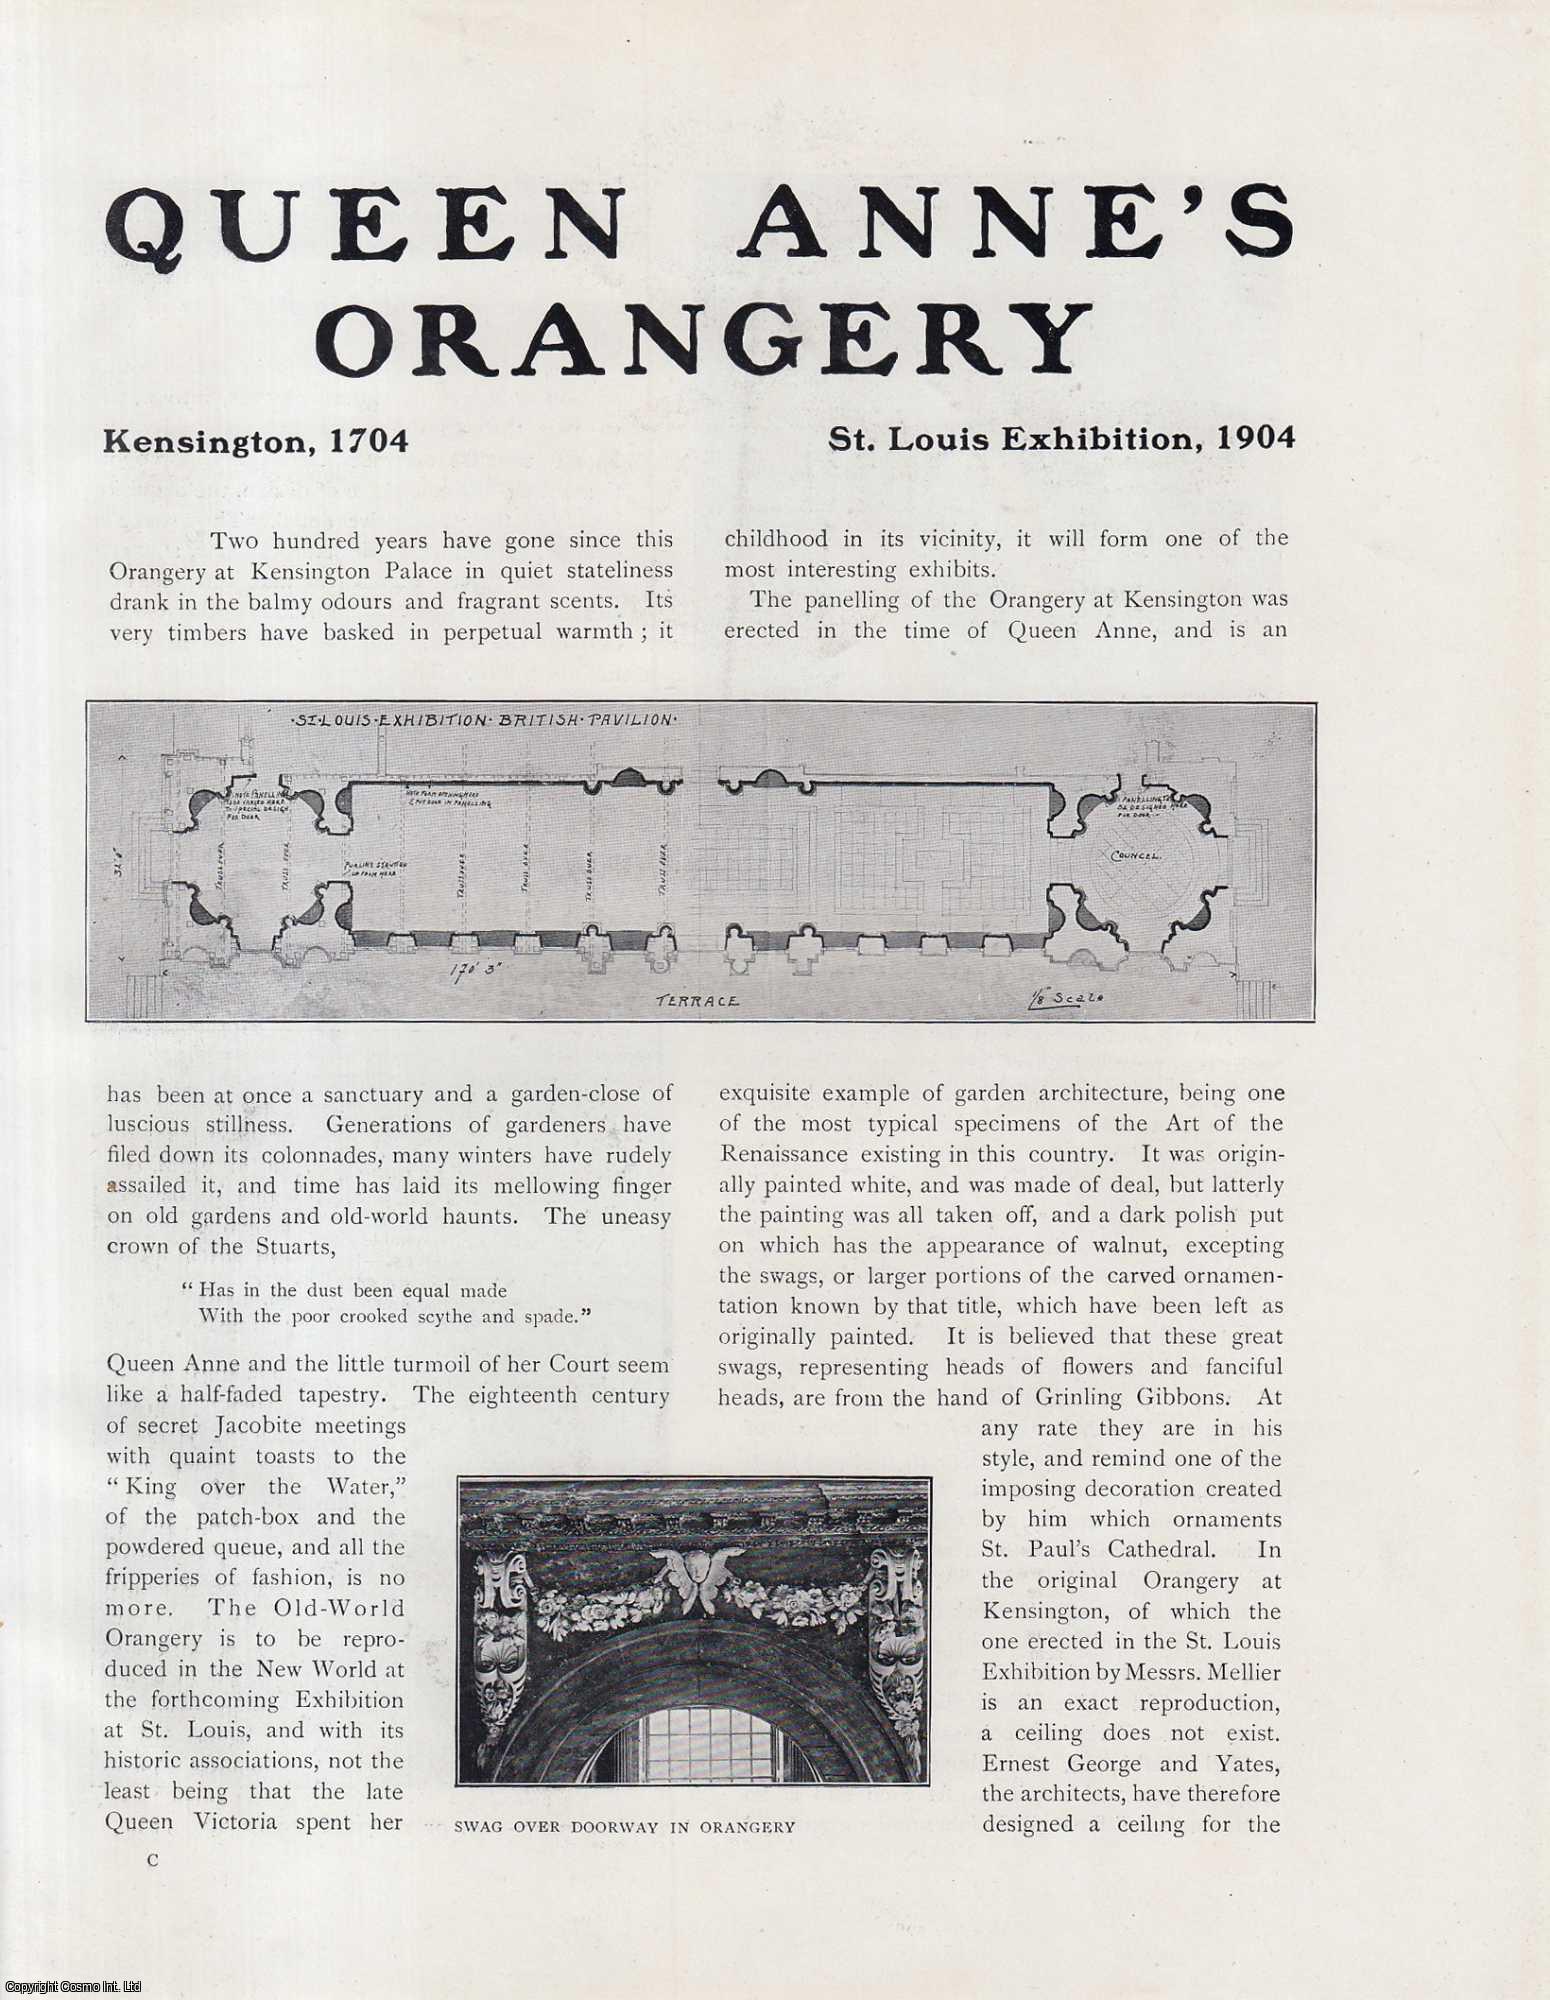 No Author Stated - Queen Anne's Orangery Kensington, 1704. St. Louis Exhibition, 1904. An original article from The Connoisseur, 1904.